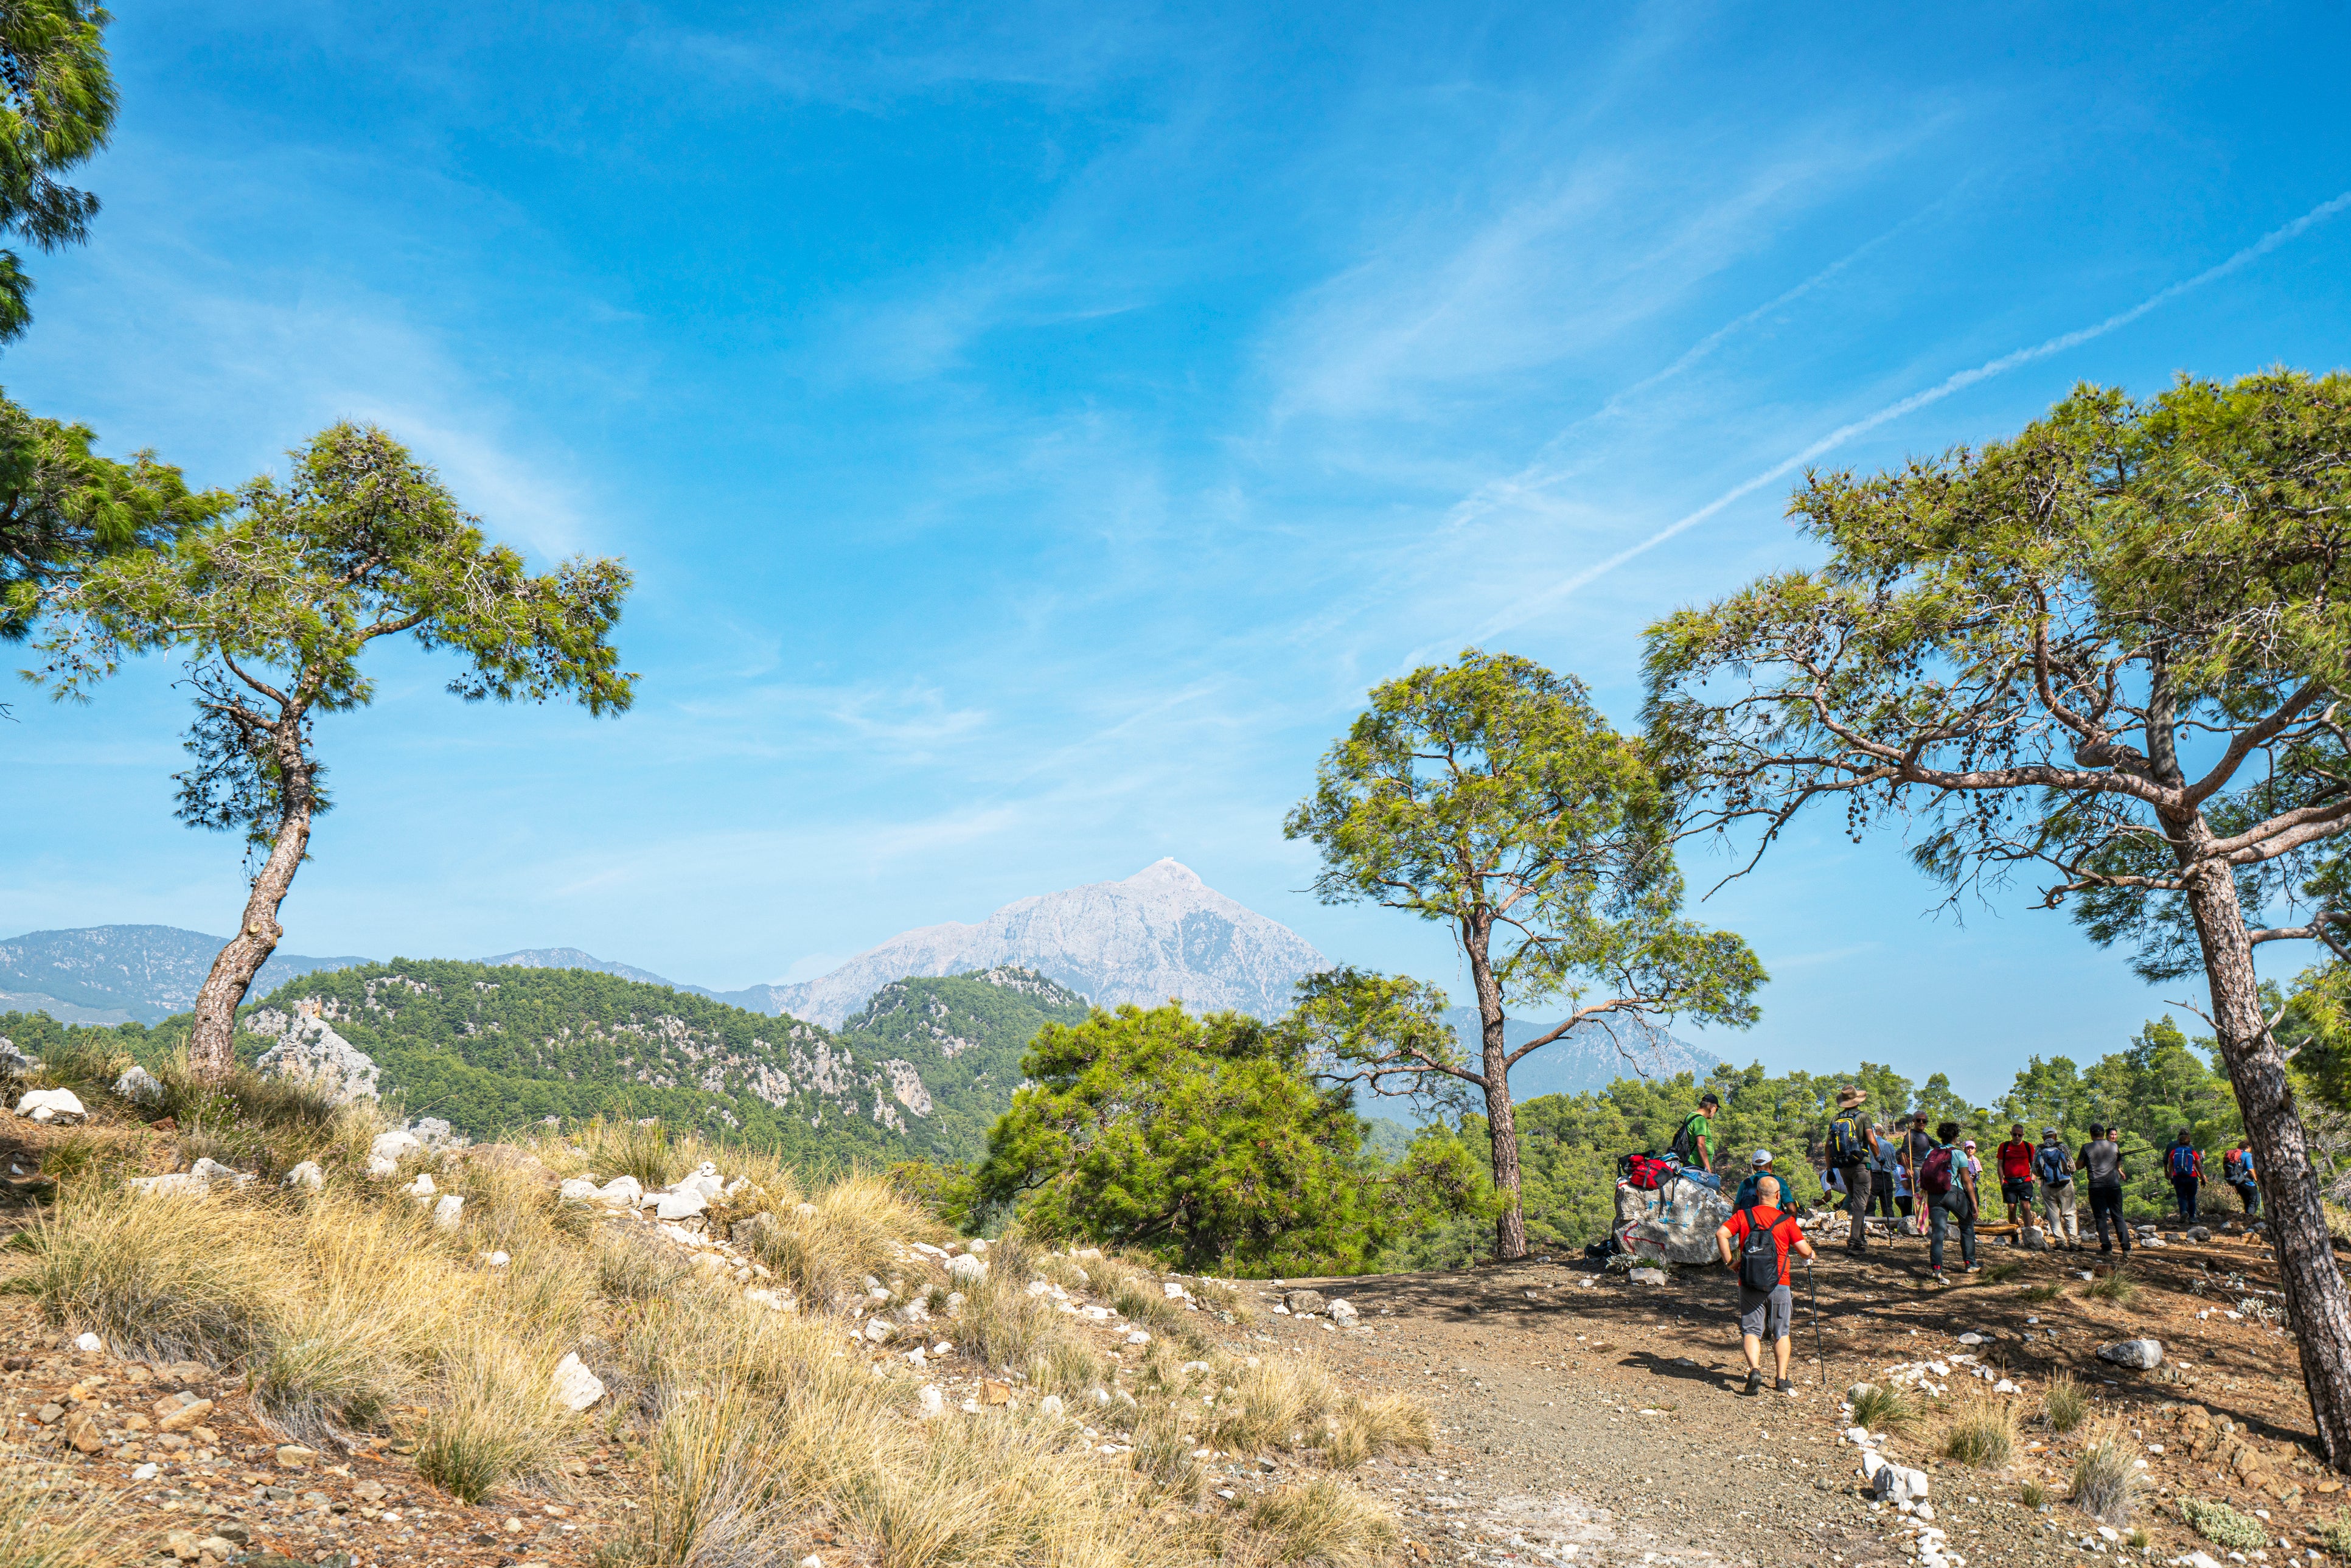 Stretching 539km from Fethiye to Antalya, the Lycian Way is a historic walking trail through Turkey’s ancient ruins